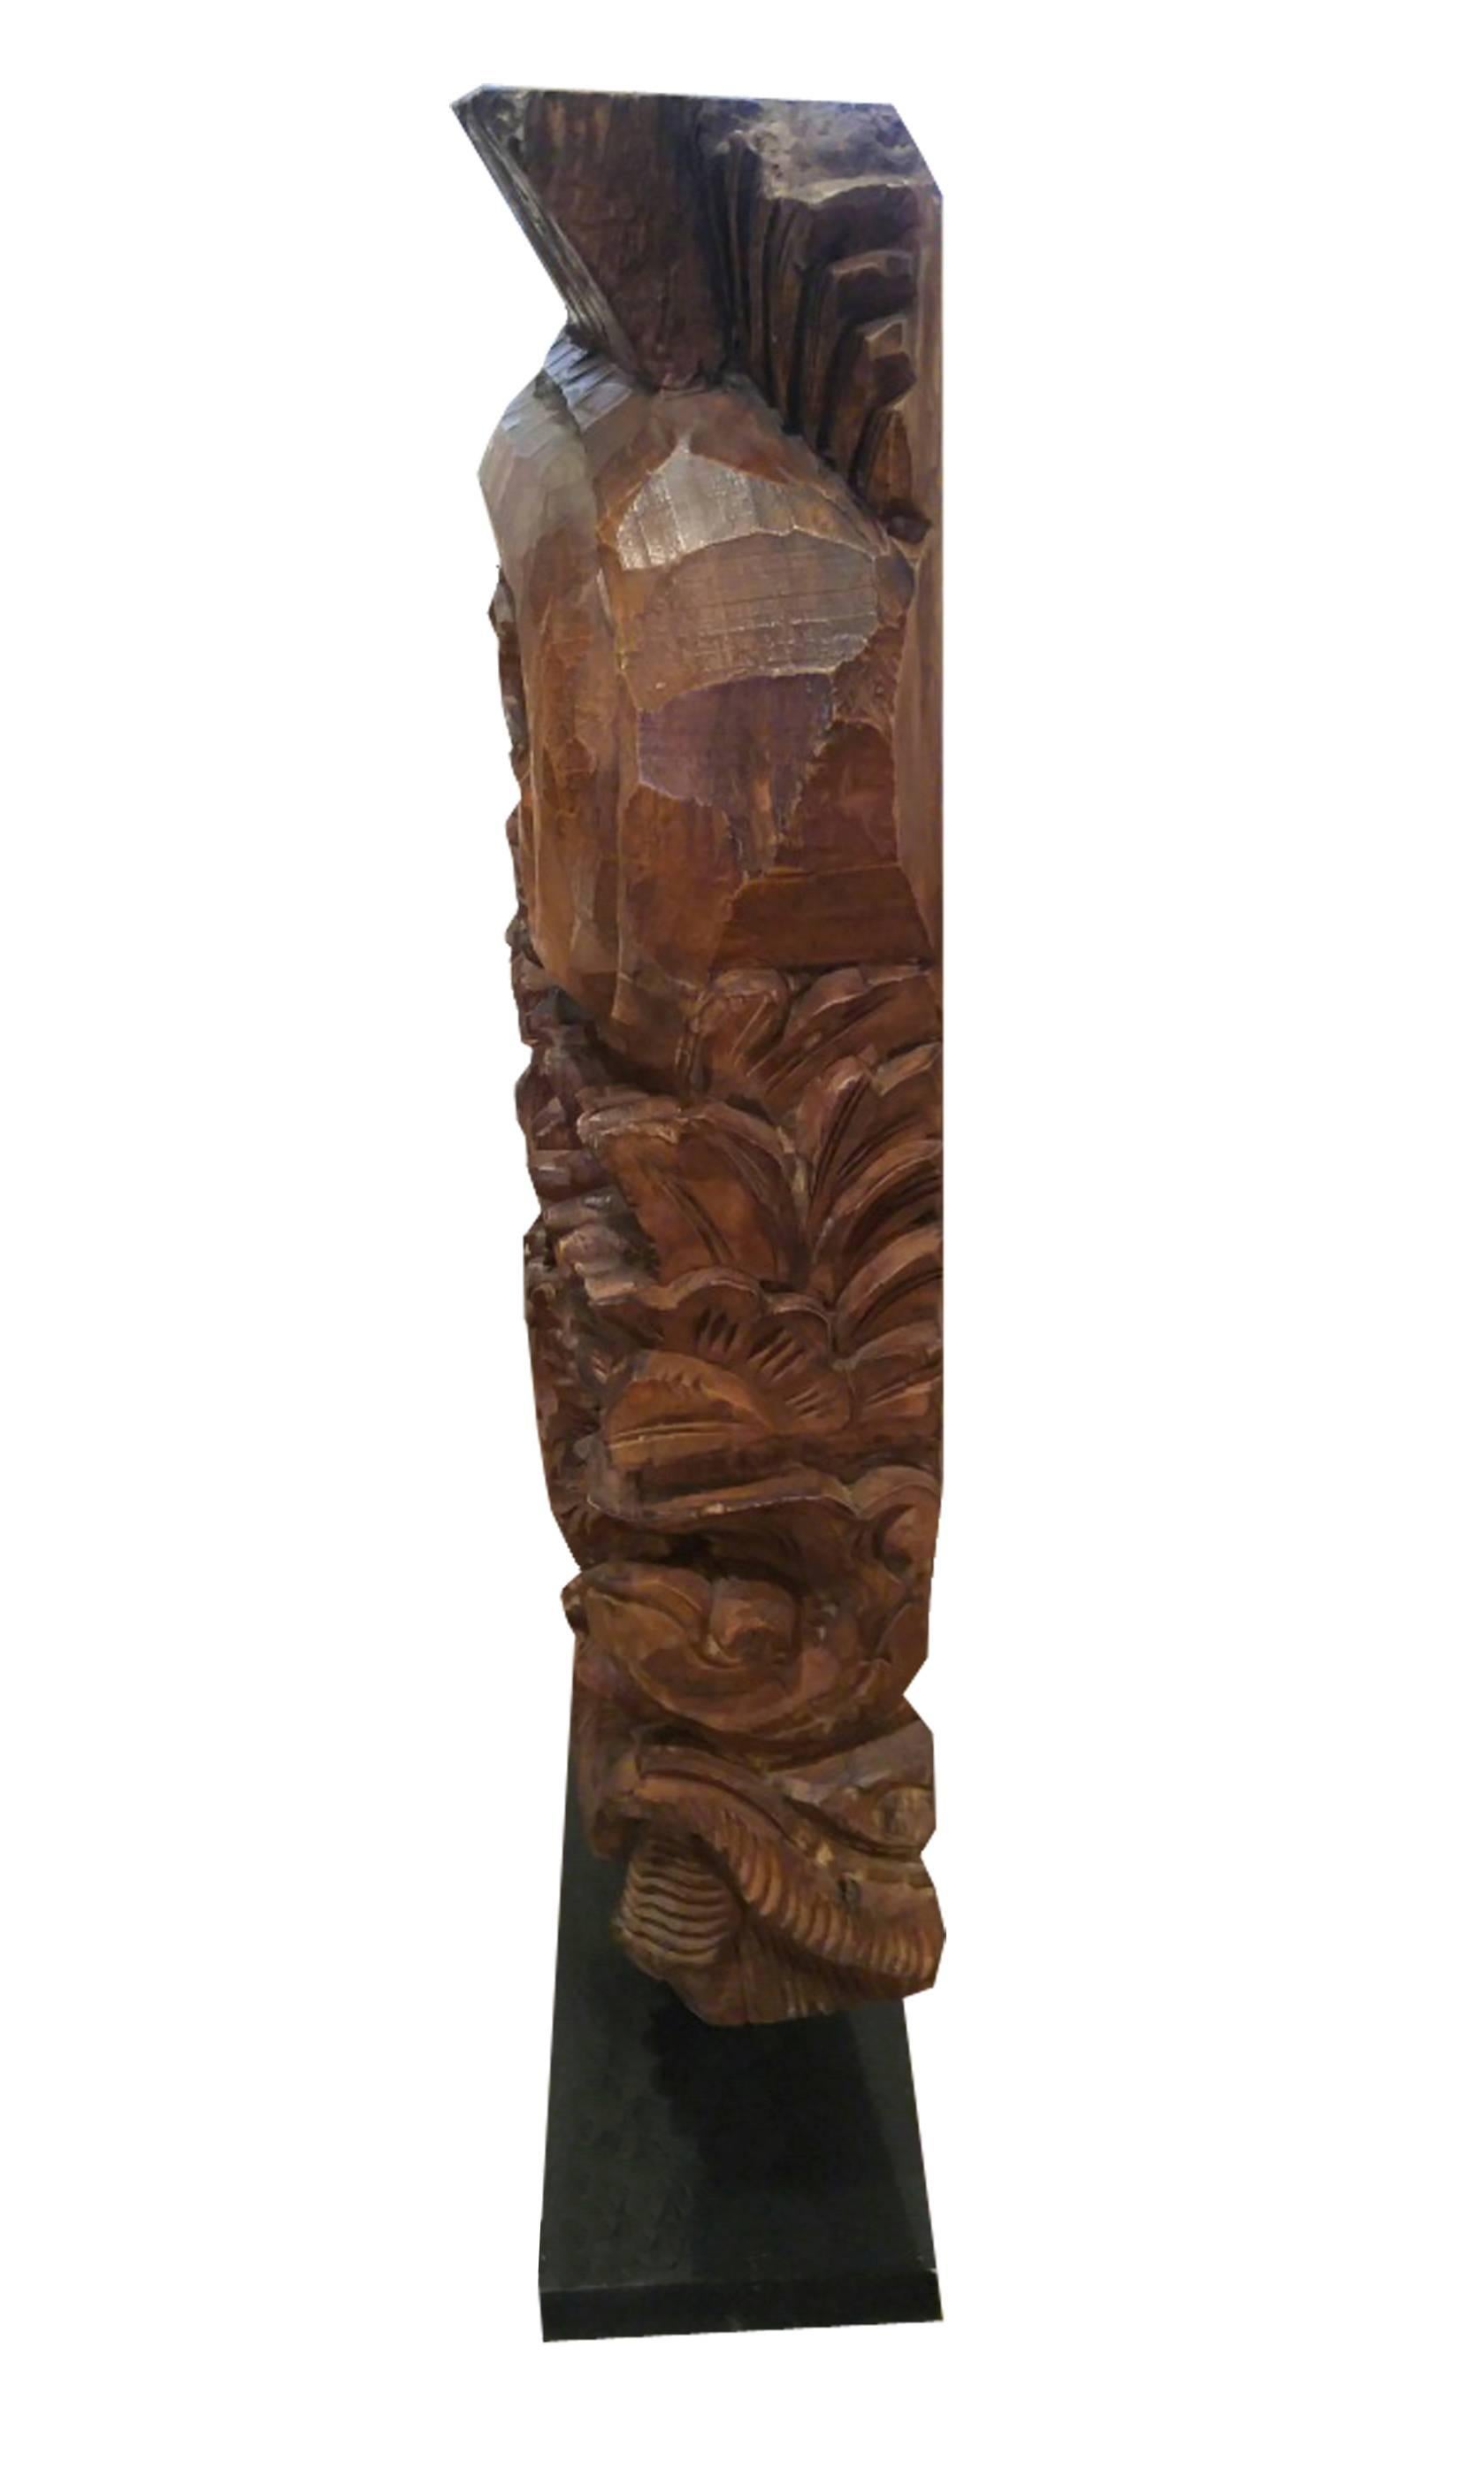 Arts and Crafts Architectural Detail in Hand-Carved Wood, on Stand, Contemporary